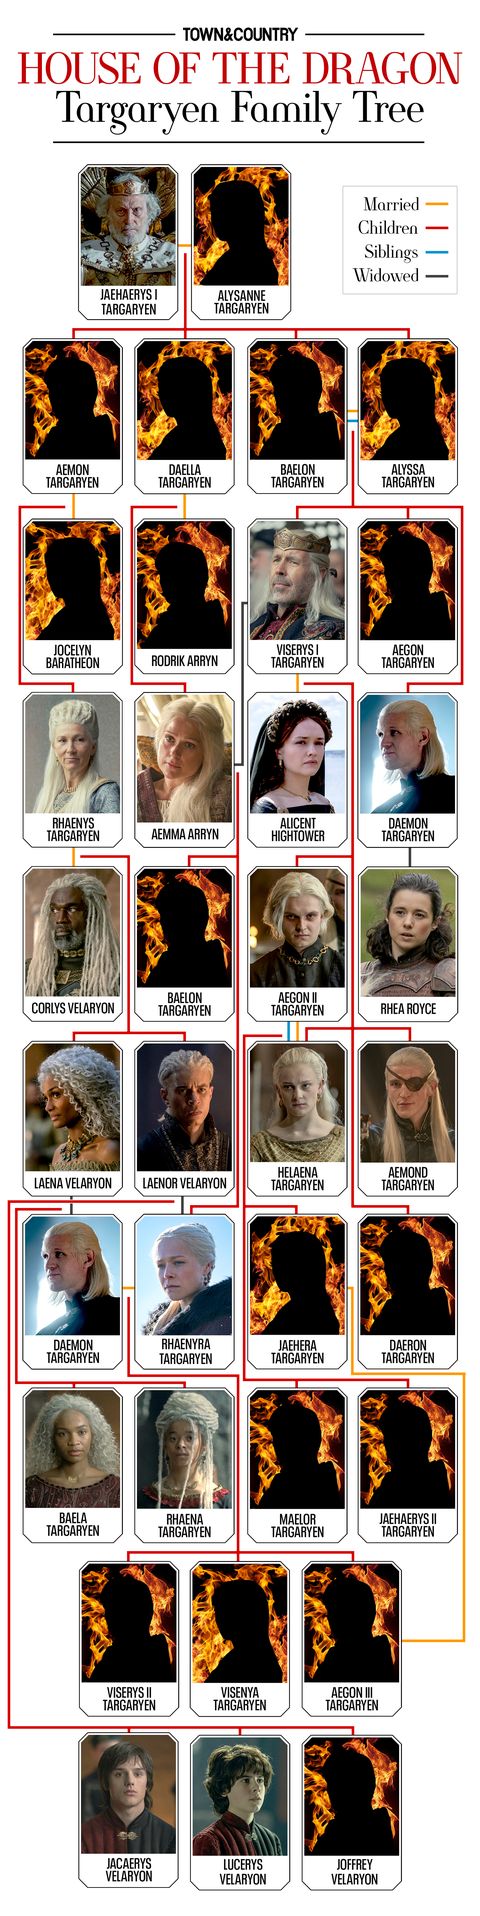 town and country house of the dragon targaryen family tree